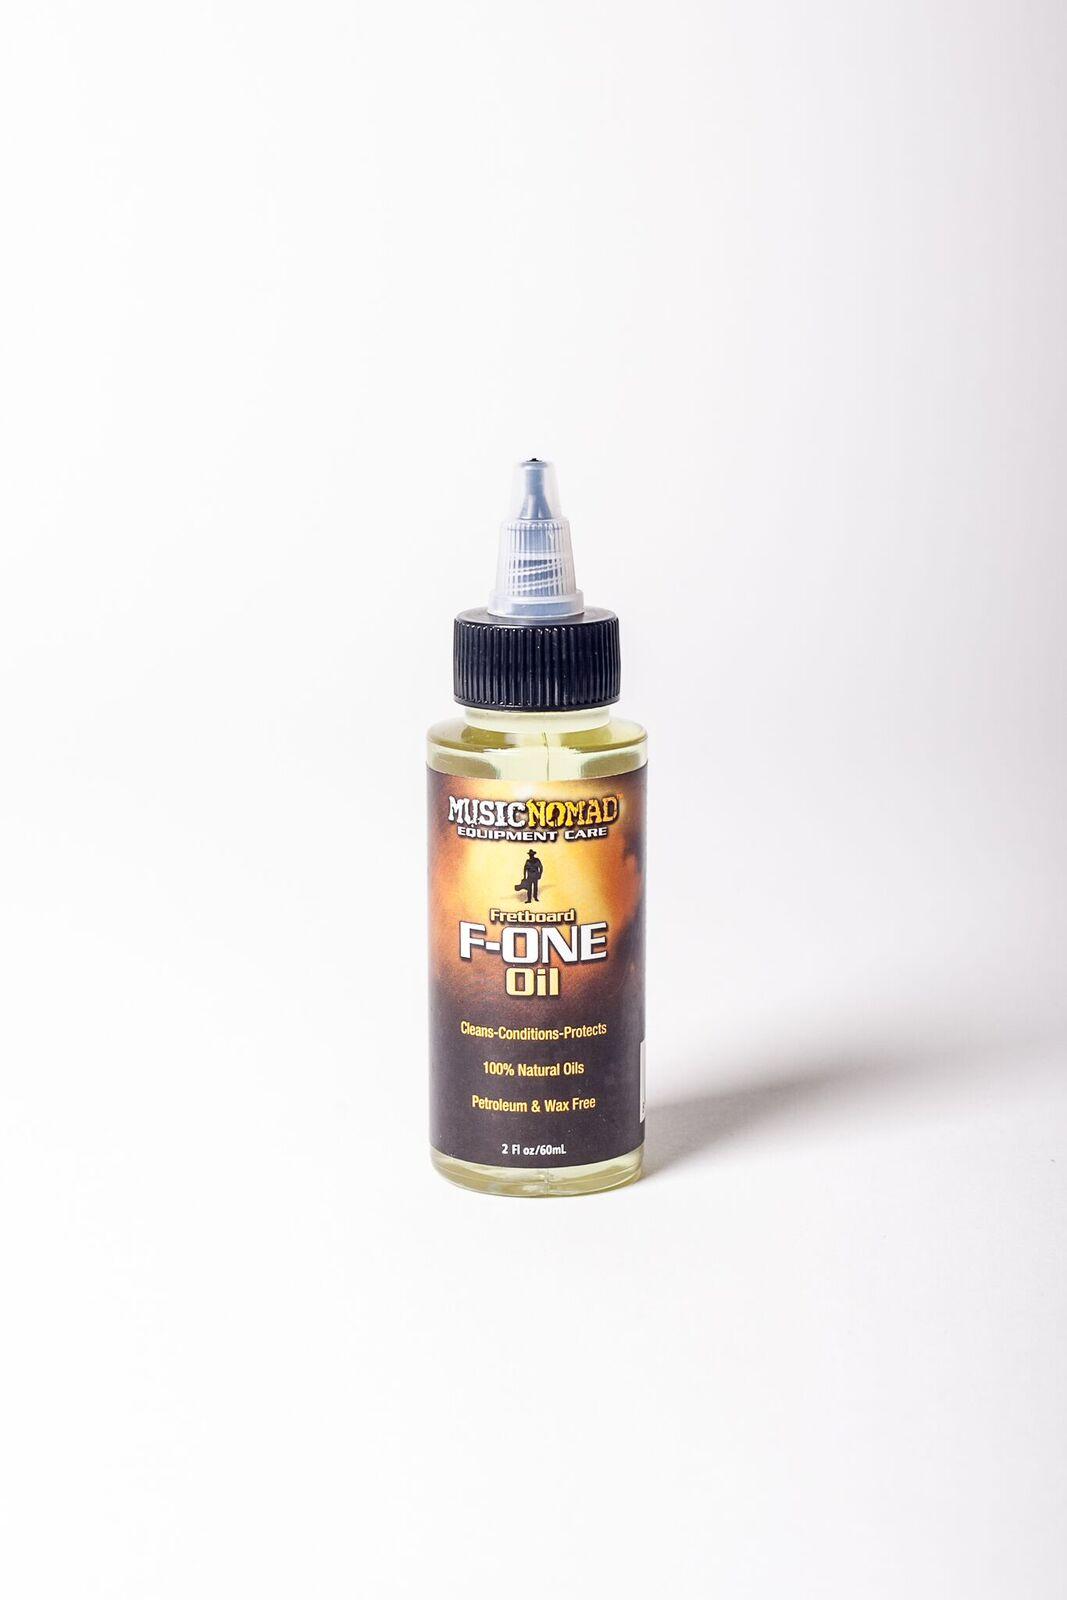 Music Nomad F-ONE Oil - Fretboard Cleaner & Conditioner